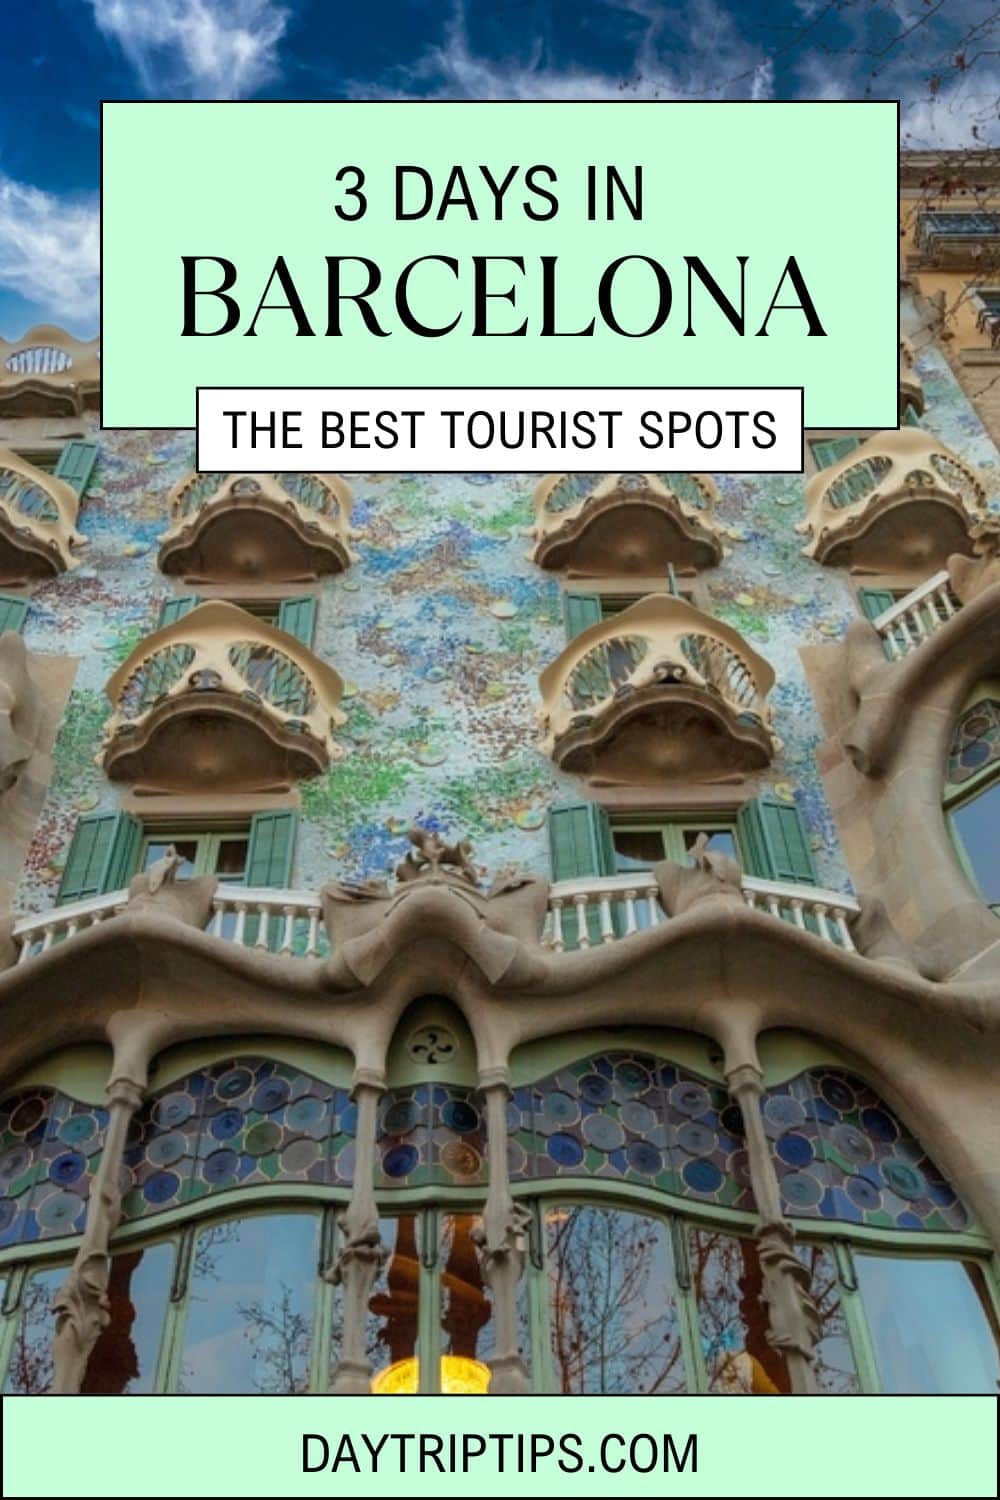 3 Days in Barcelona Itinerary